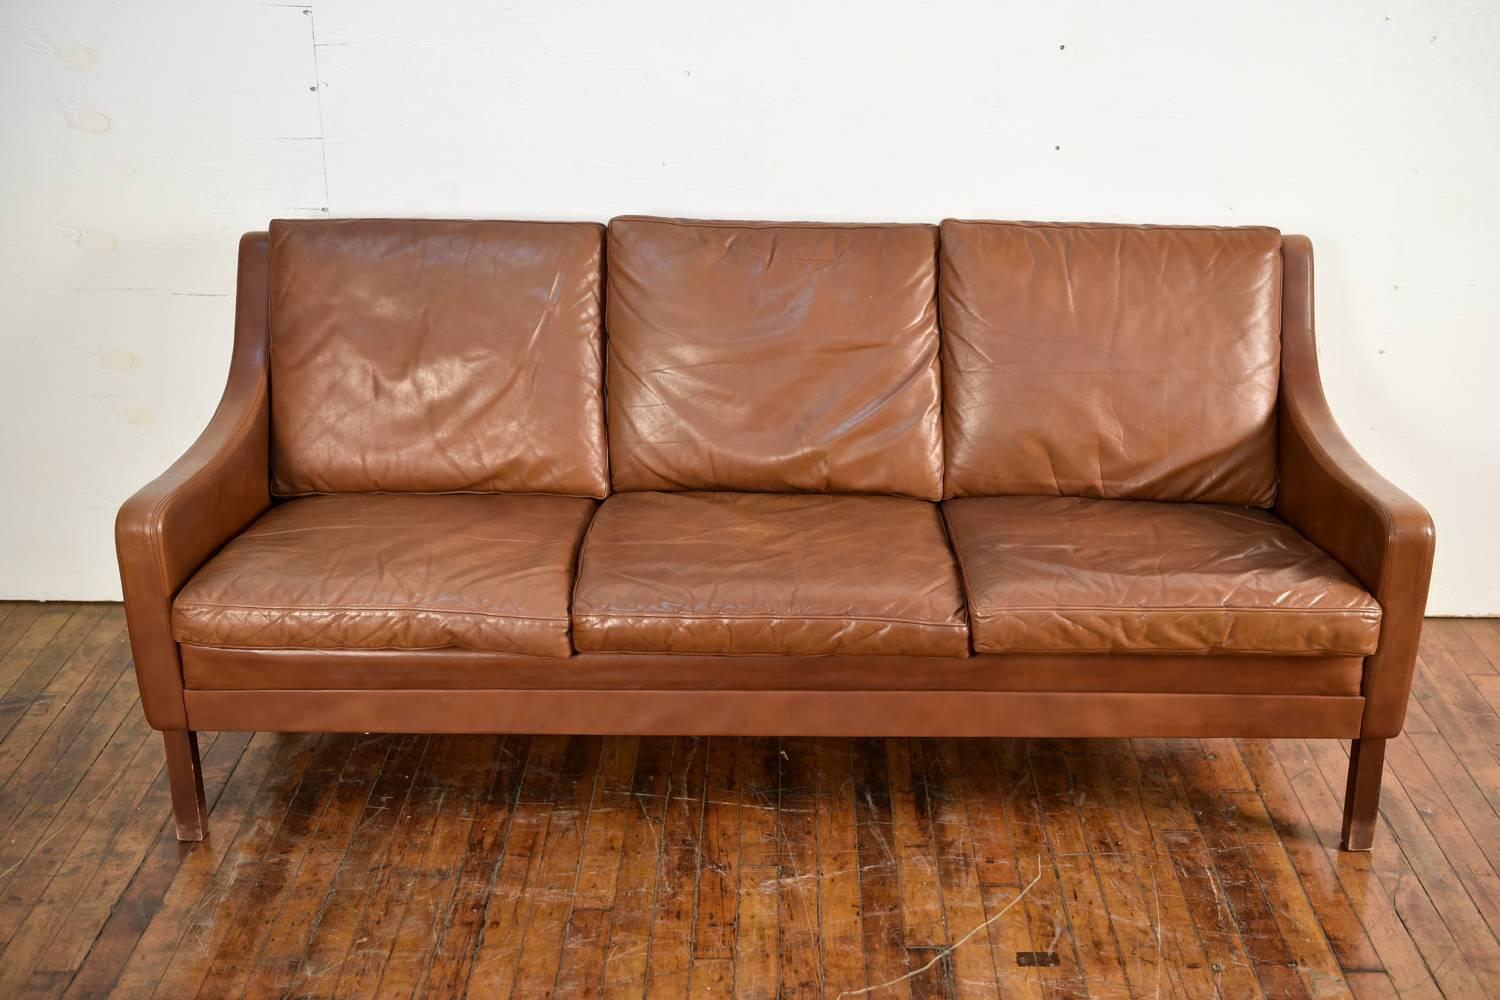 This Danish midcentury sofa is in the manner of the iconic designer Børge Mogensen. Great leather with attractive vintage wear.